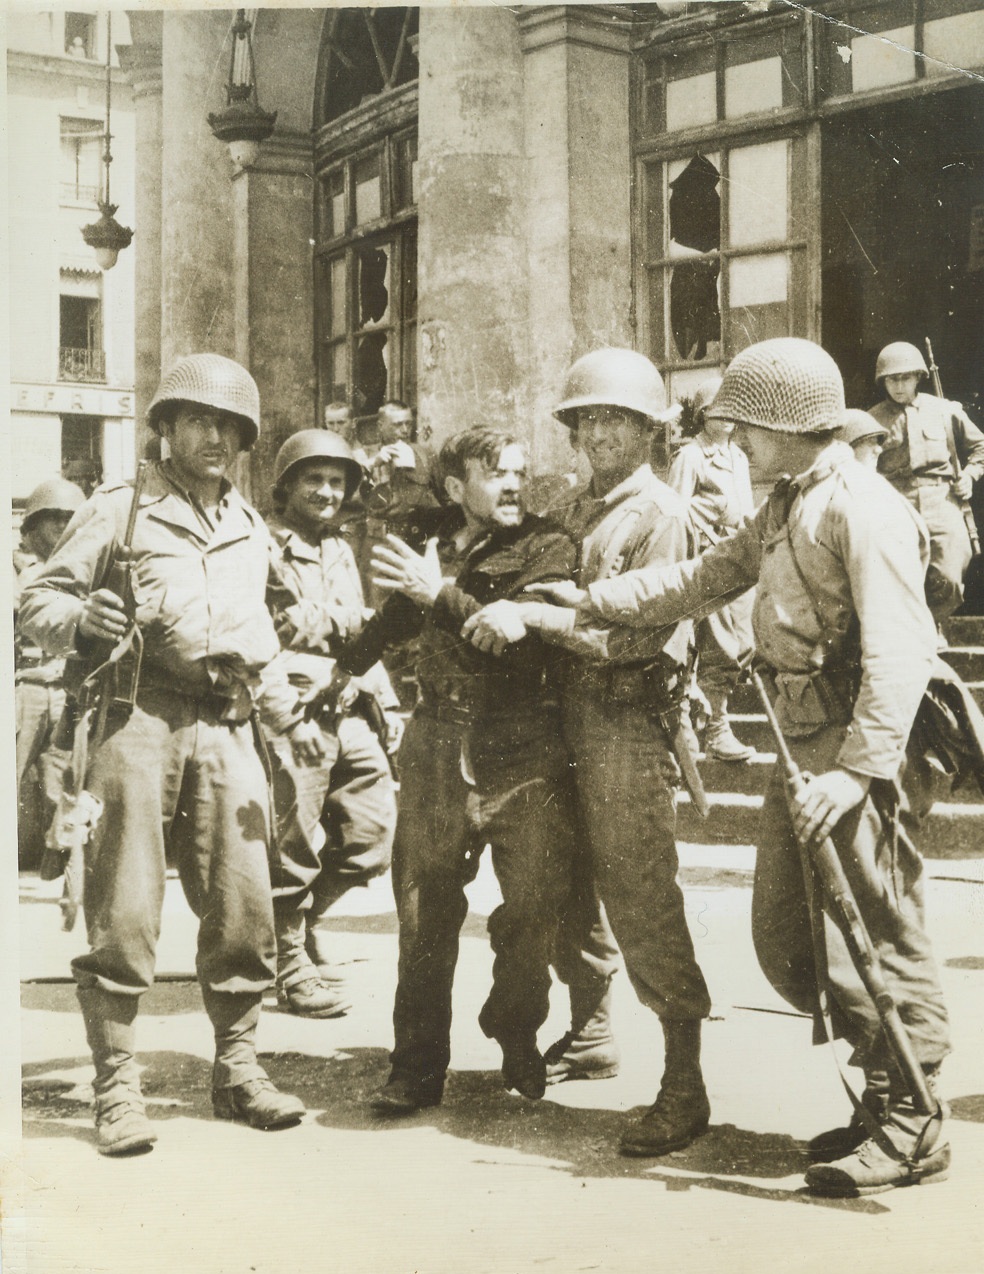 Underdog Turns on Nazis, 8/11/1944. Rennes, France—While American soldiers restrain him, this French patriot struggles to free himself and vent his wrath on disarmed Nazi prisoners of war gathered on the Rennes City Hall steps. Finally freed of Nazi oppression, he fought to get at those who were responsible for the tyrannical treatment.  Credit: ACME;